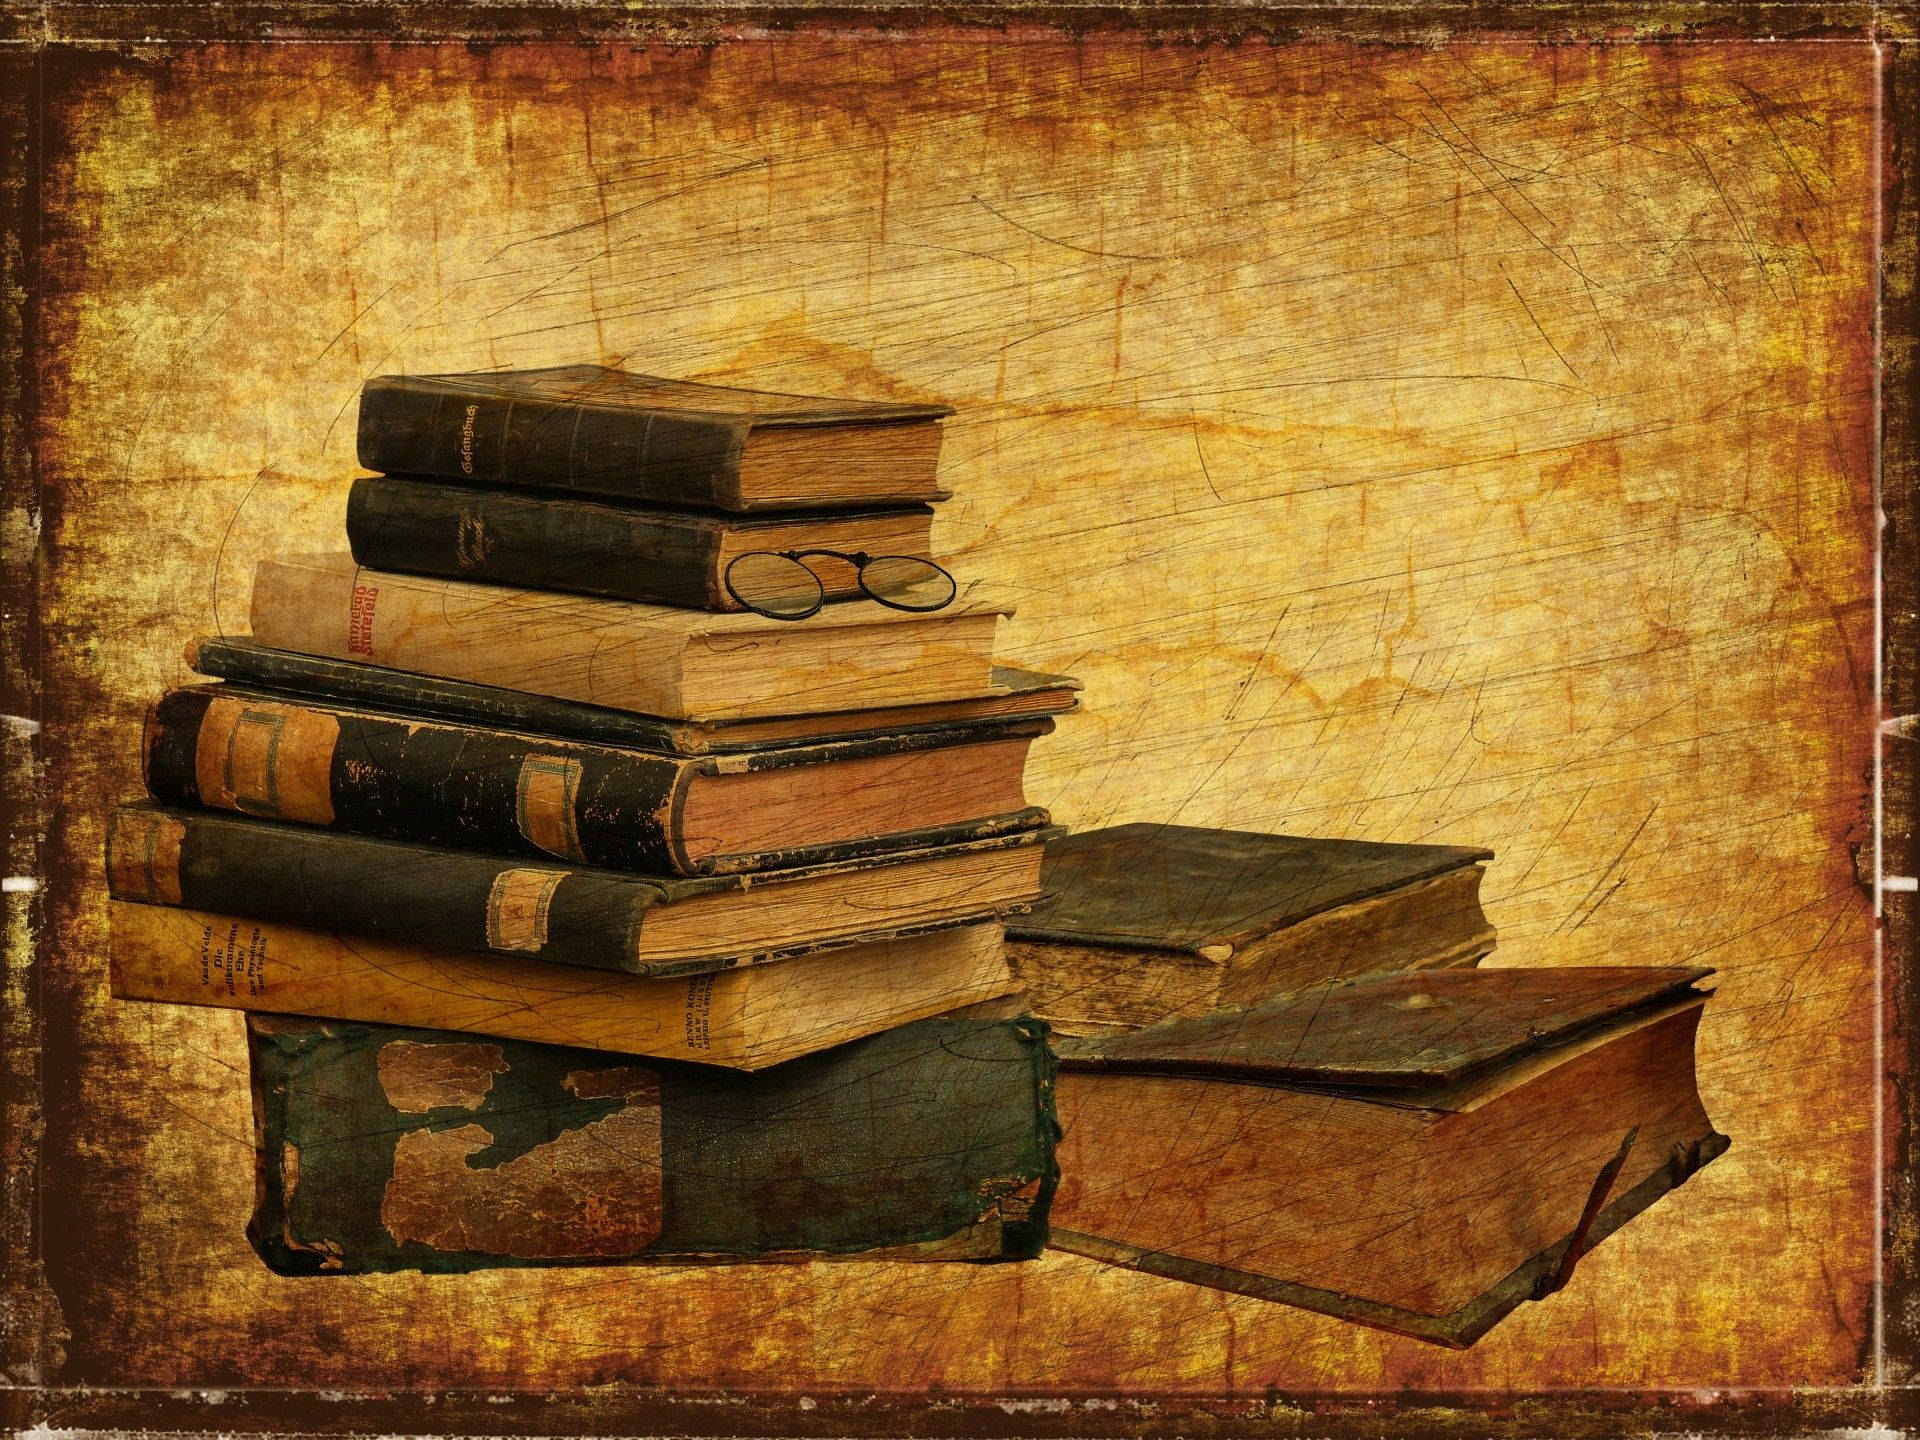 Aesthetic Old Books Stacked With Hard Book Cover Wallpaper